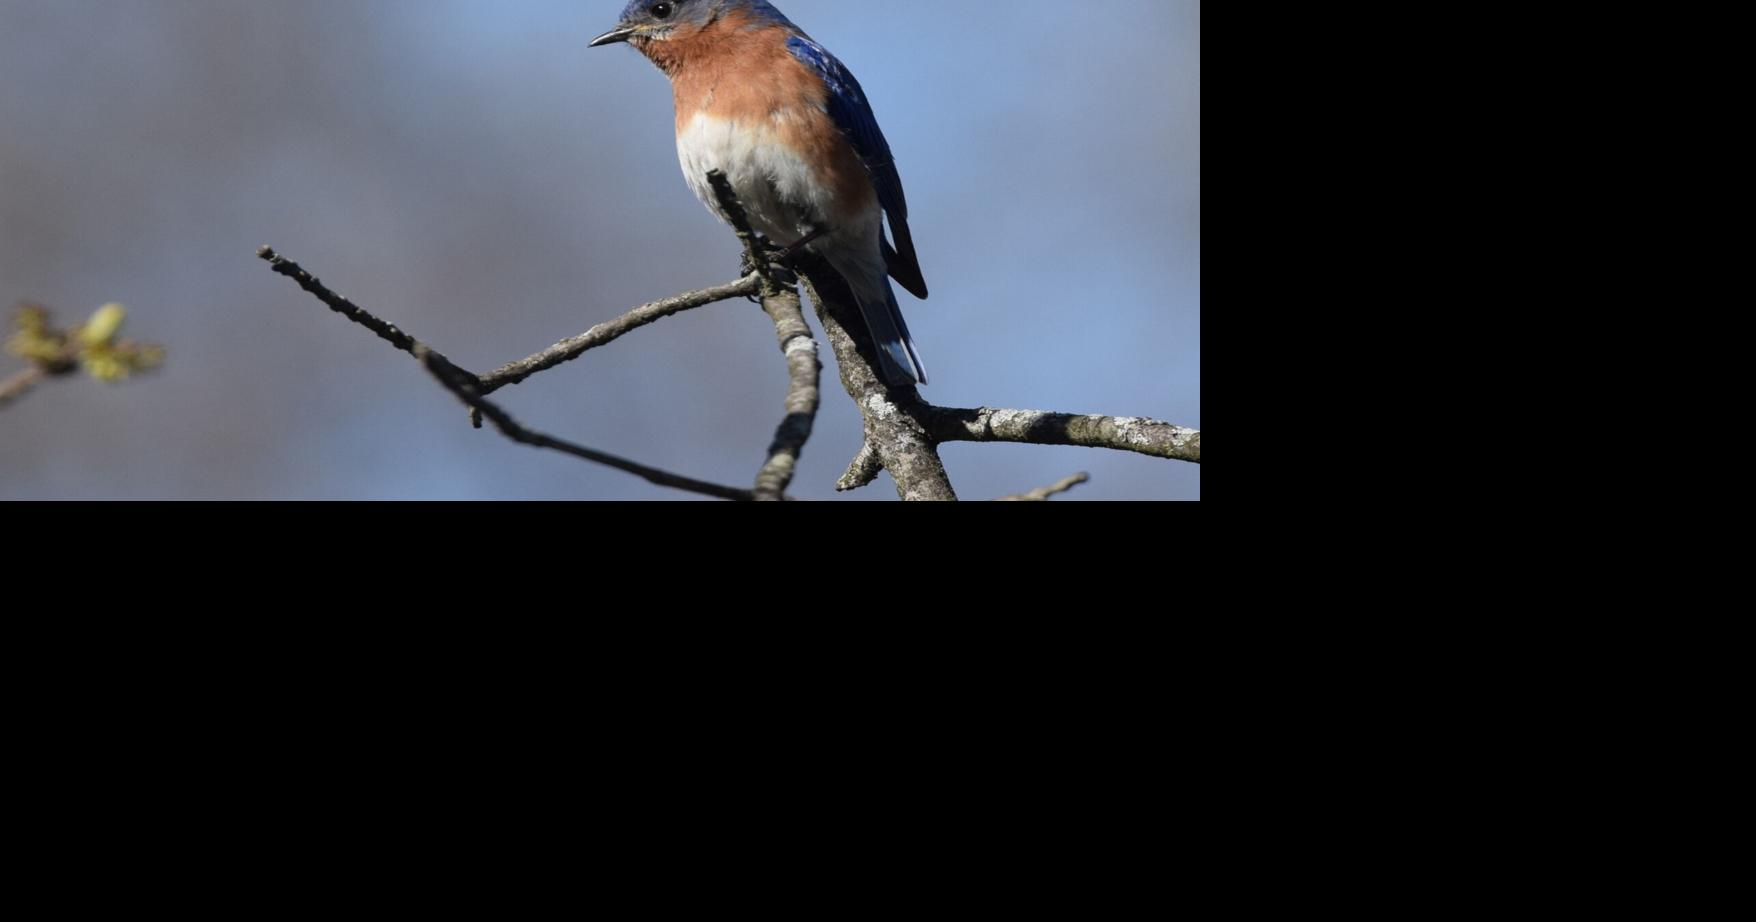 Feathered Friends: Get ready for bluebird season | Lifestyles